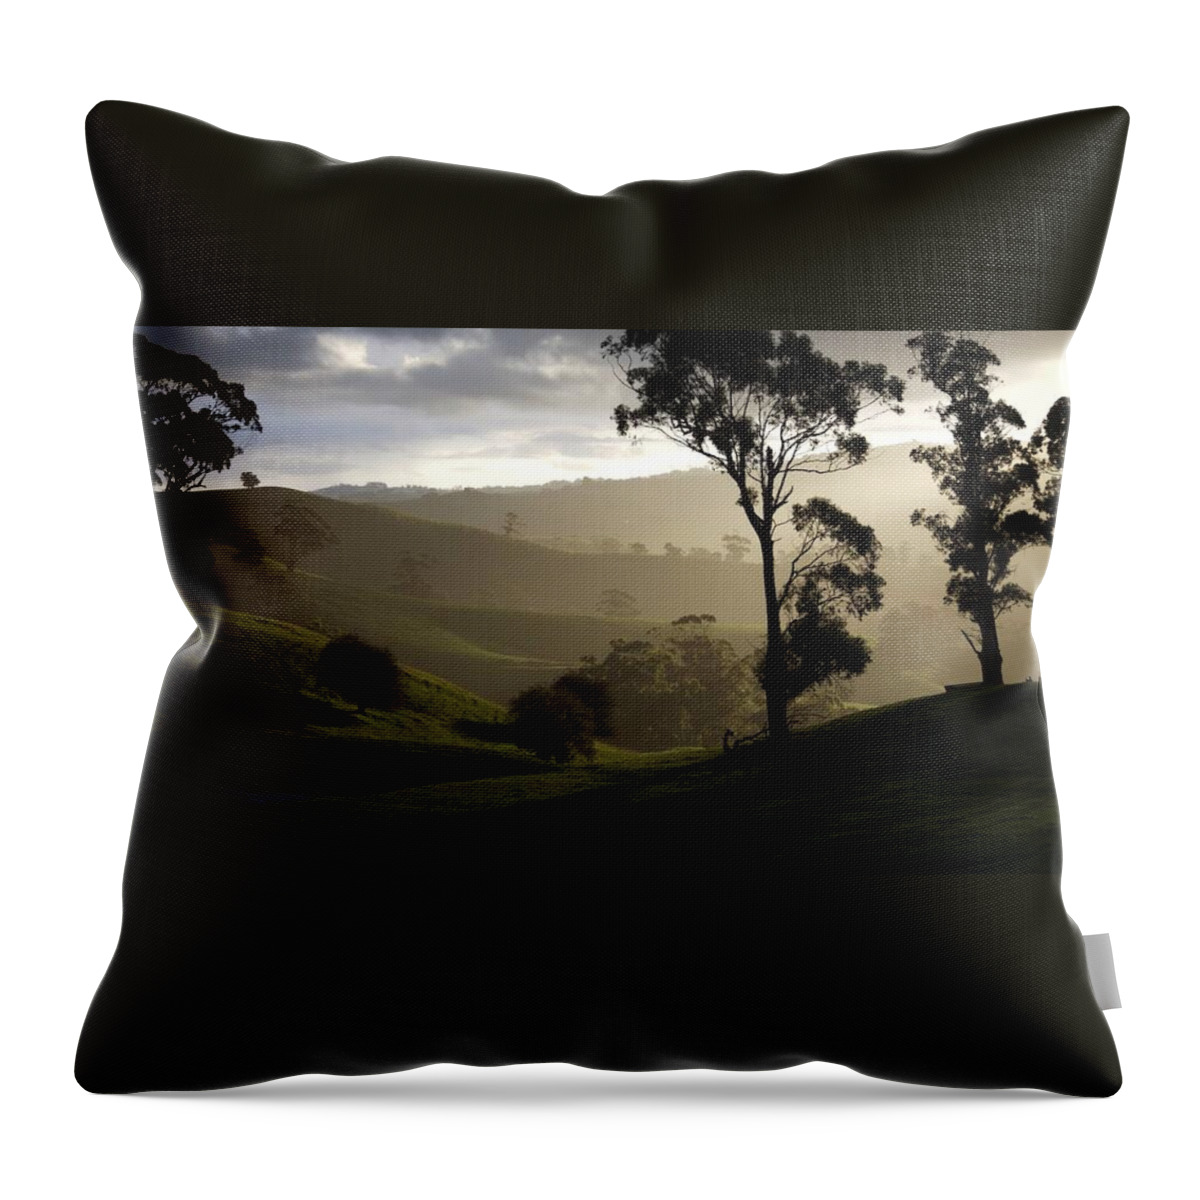 Landscapes Throw Pillow featuring the photograph Misty by Lee Stickels